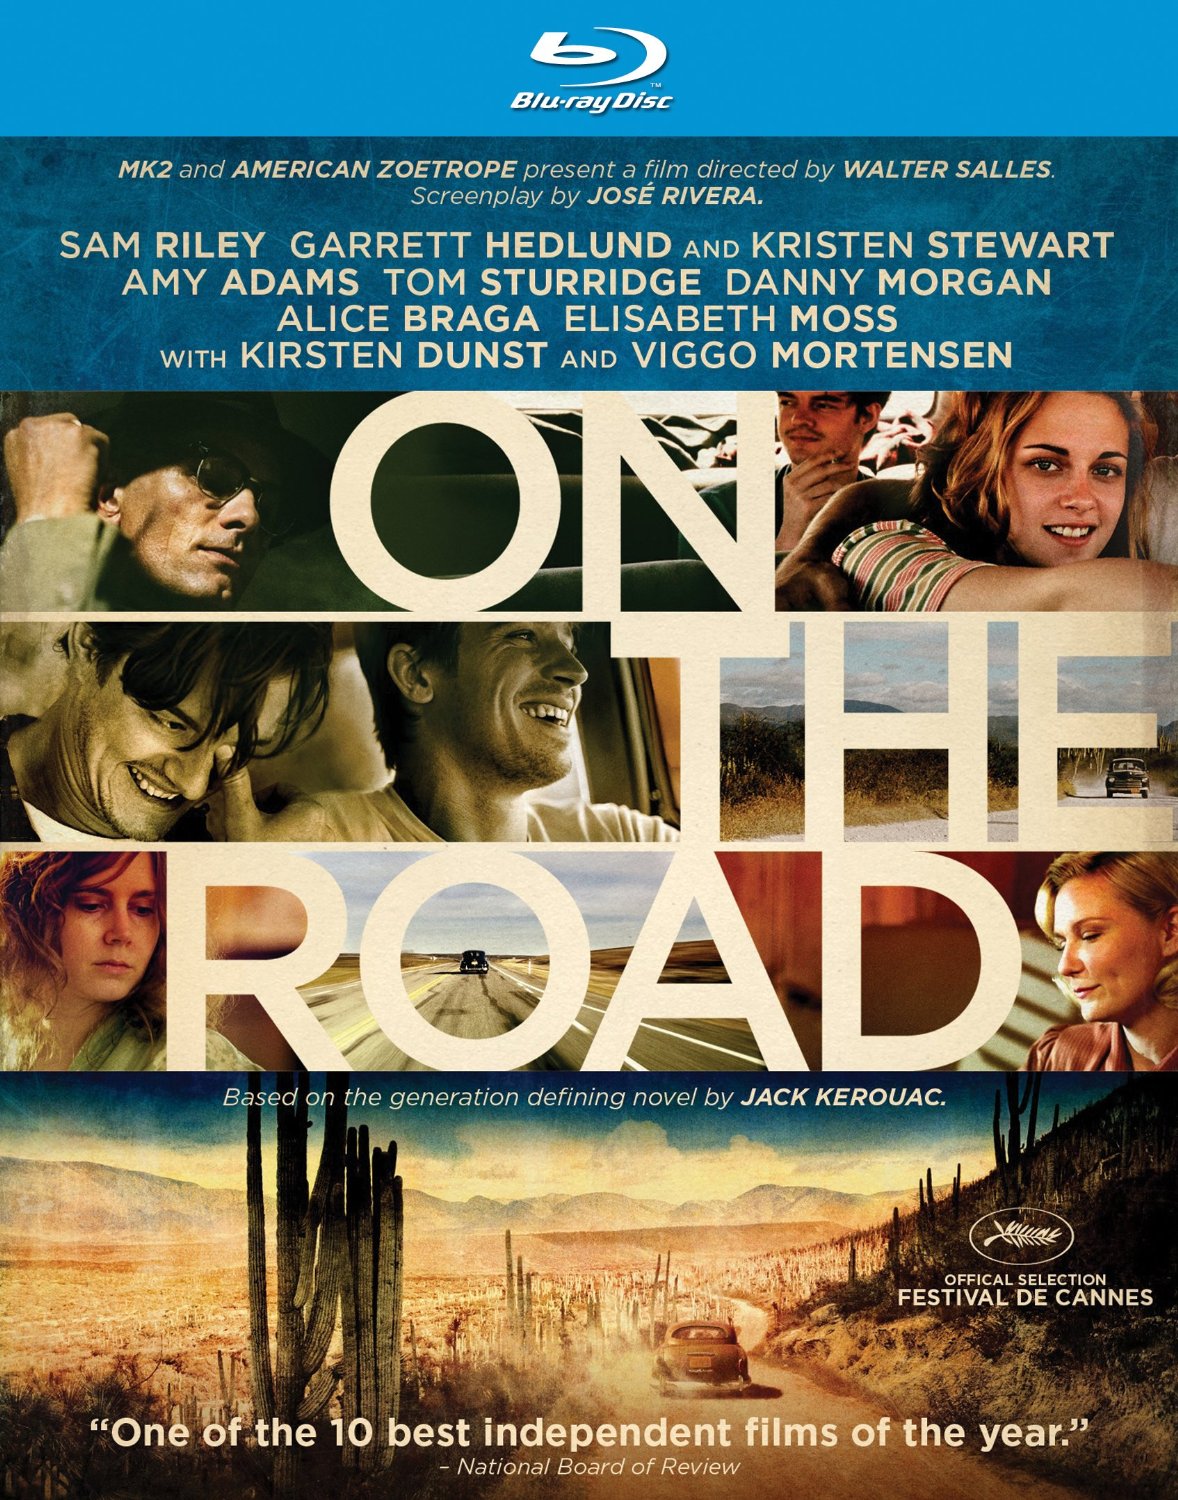 DVD Reviews: On the Road